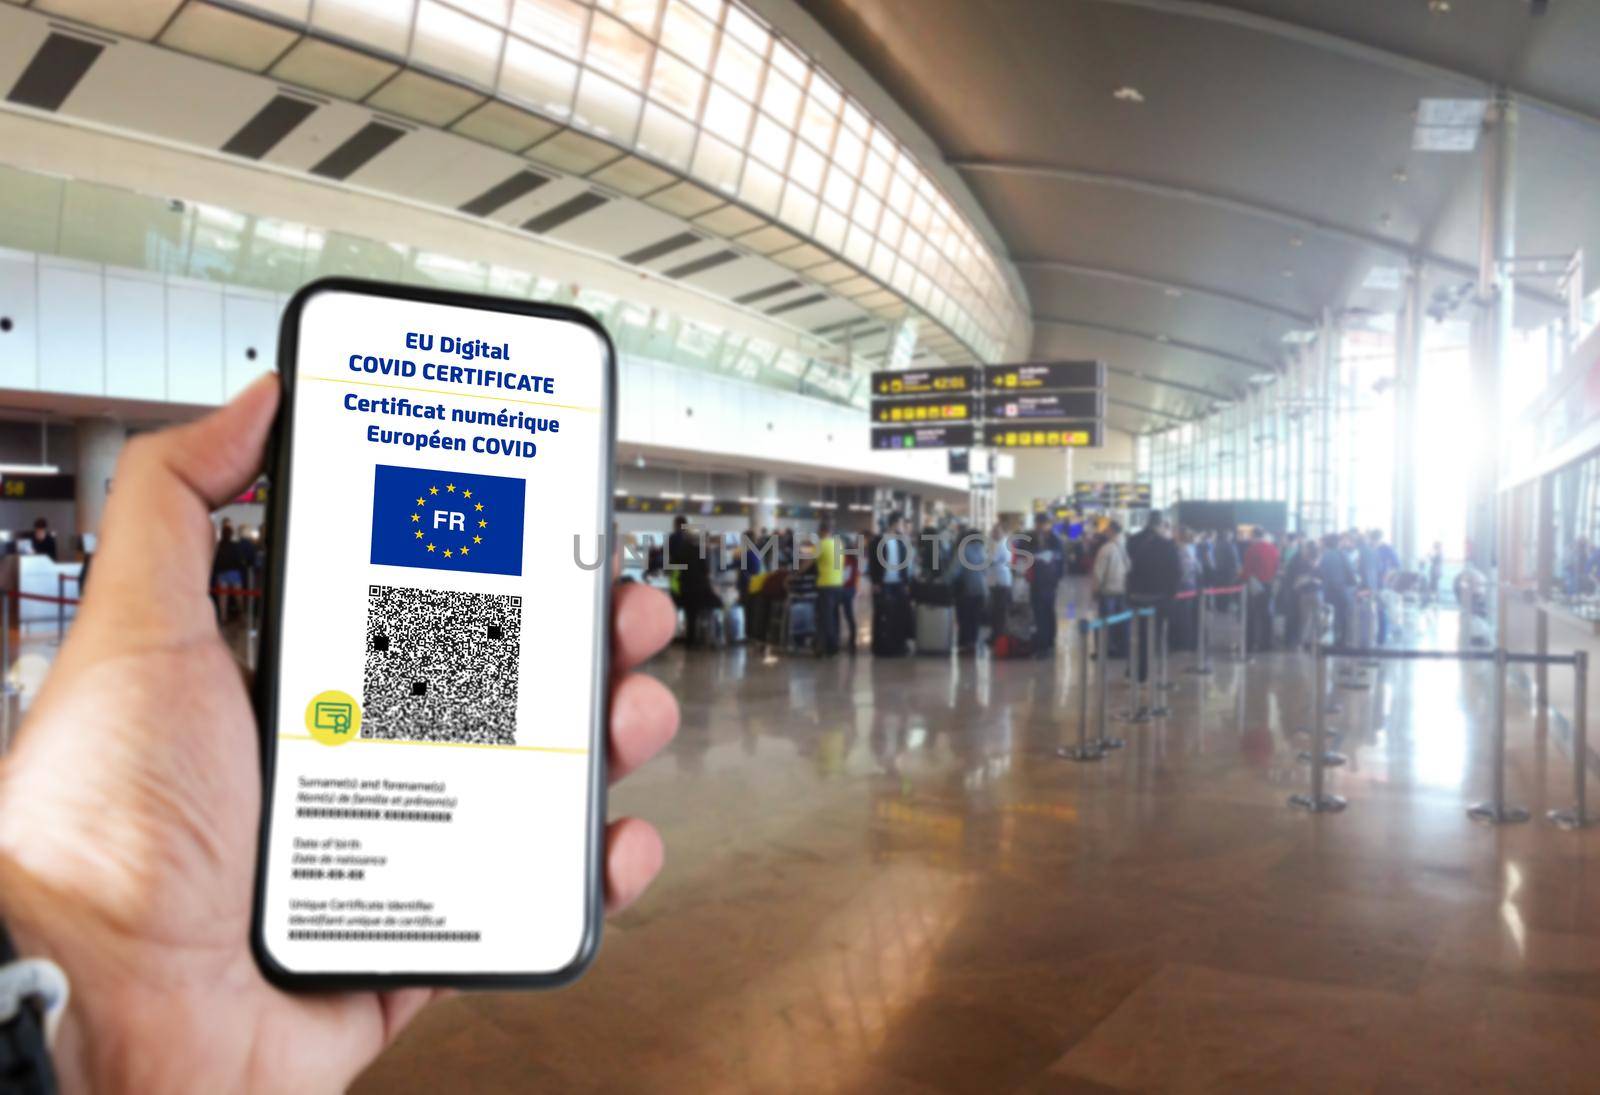 French EU Digital COVID Certificate with the QR code on the screen of a mobile held by a hand with blurred airport in the background. Translation from french "European COVID digital certificate"